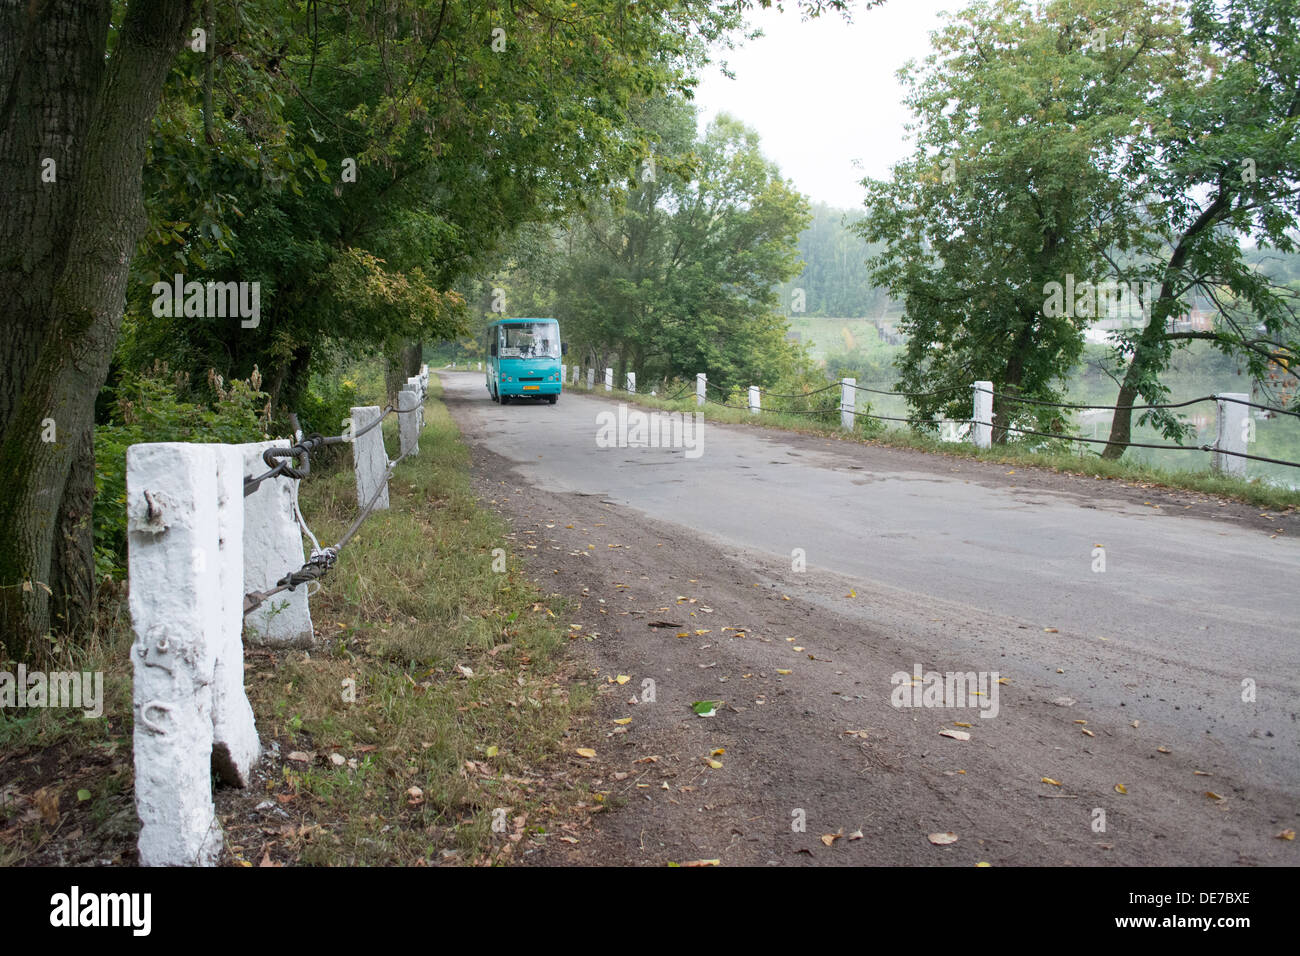 A passenger bus by the lakeside in rural Ukraine Stock Photo